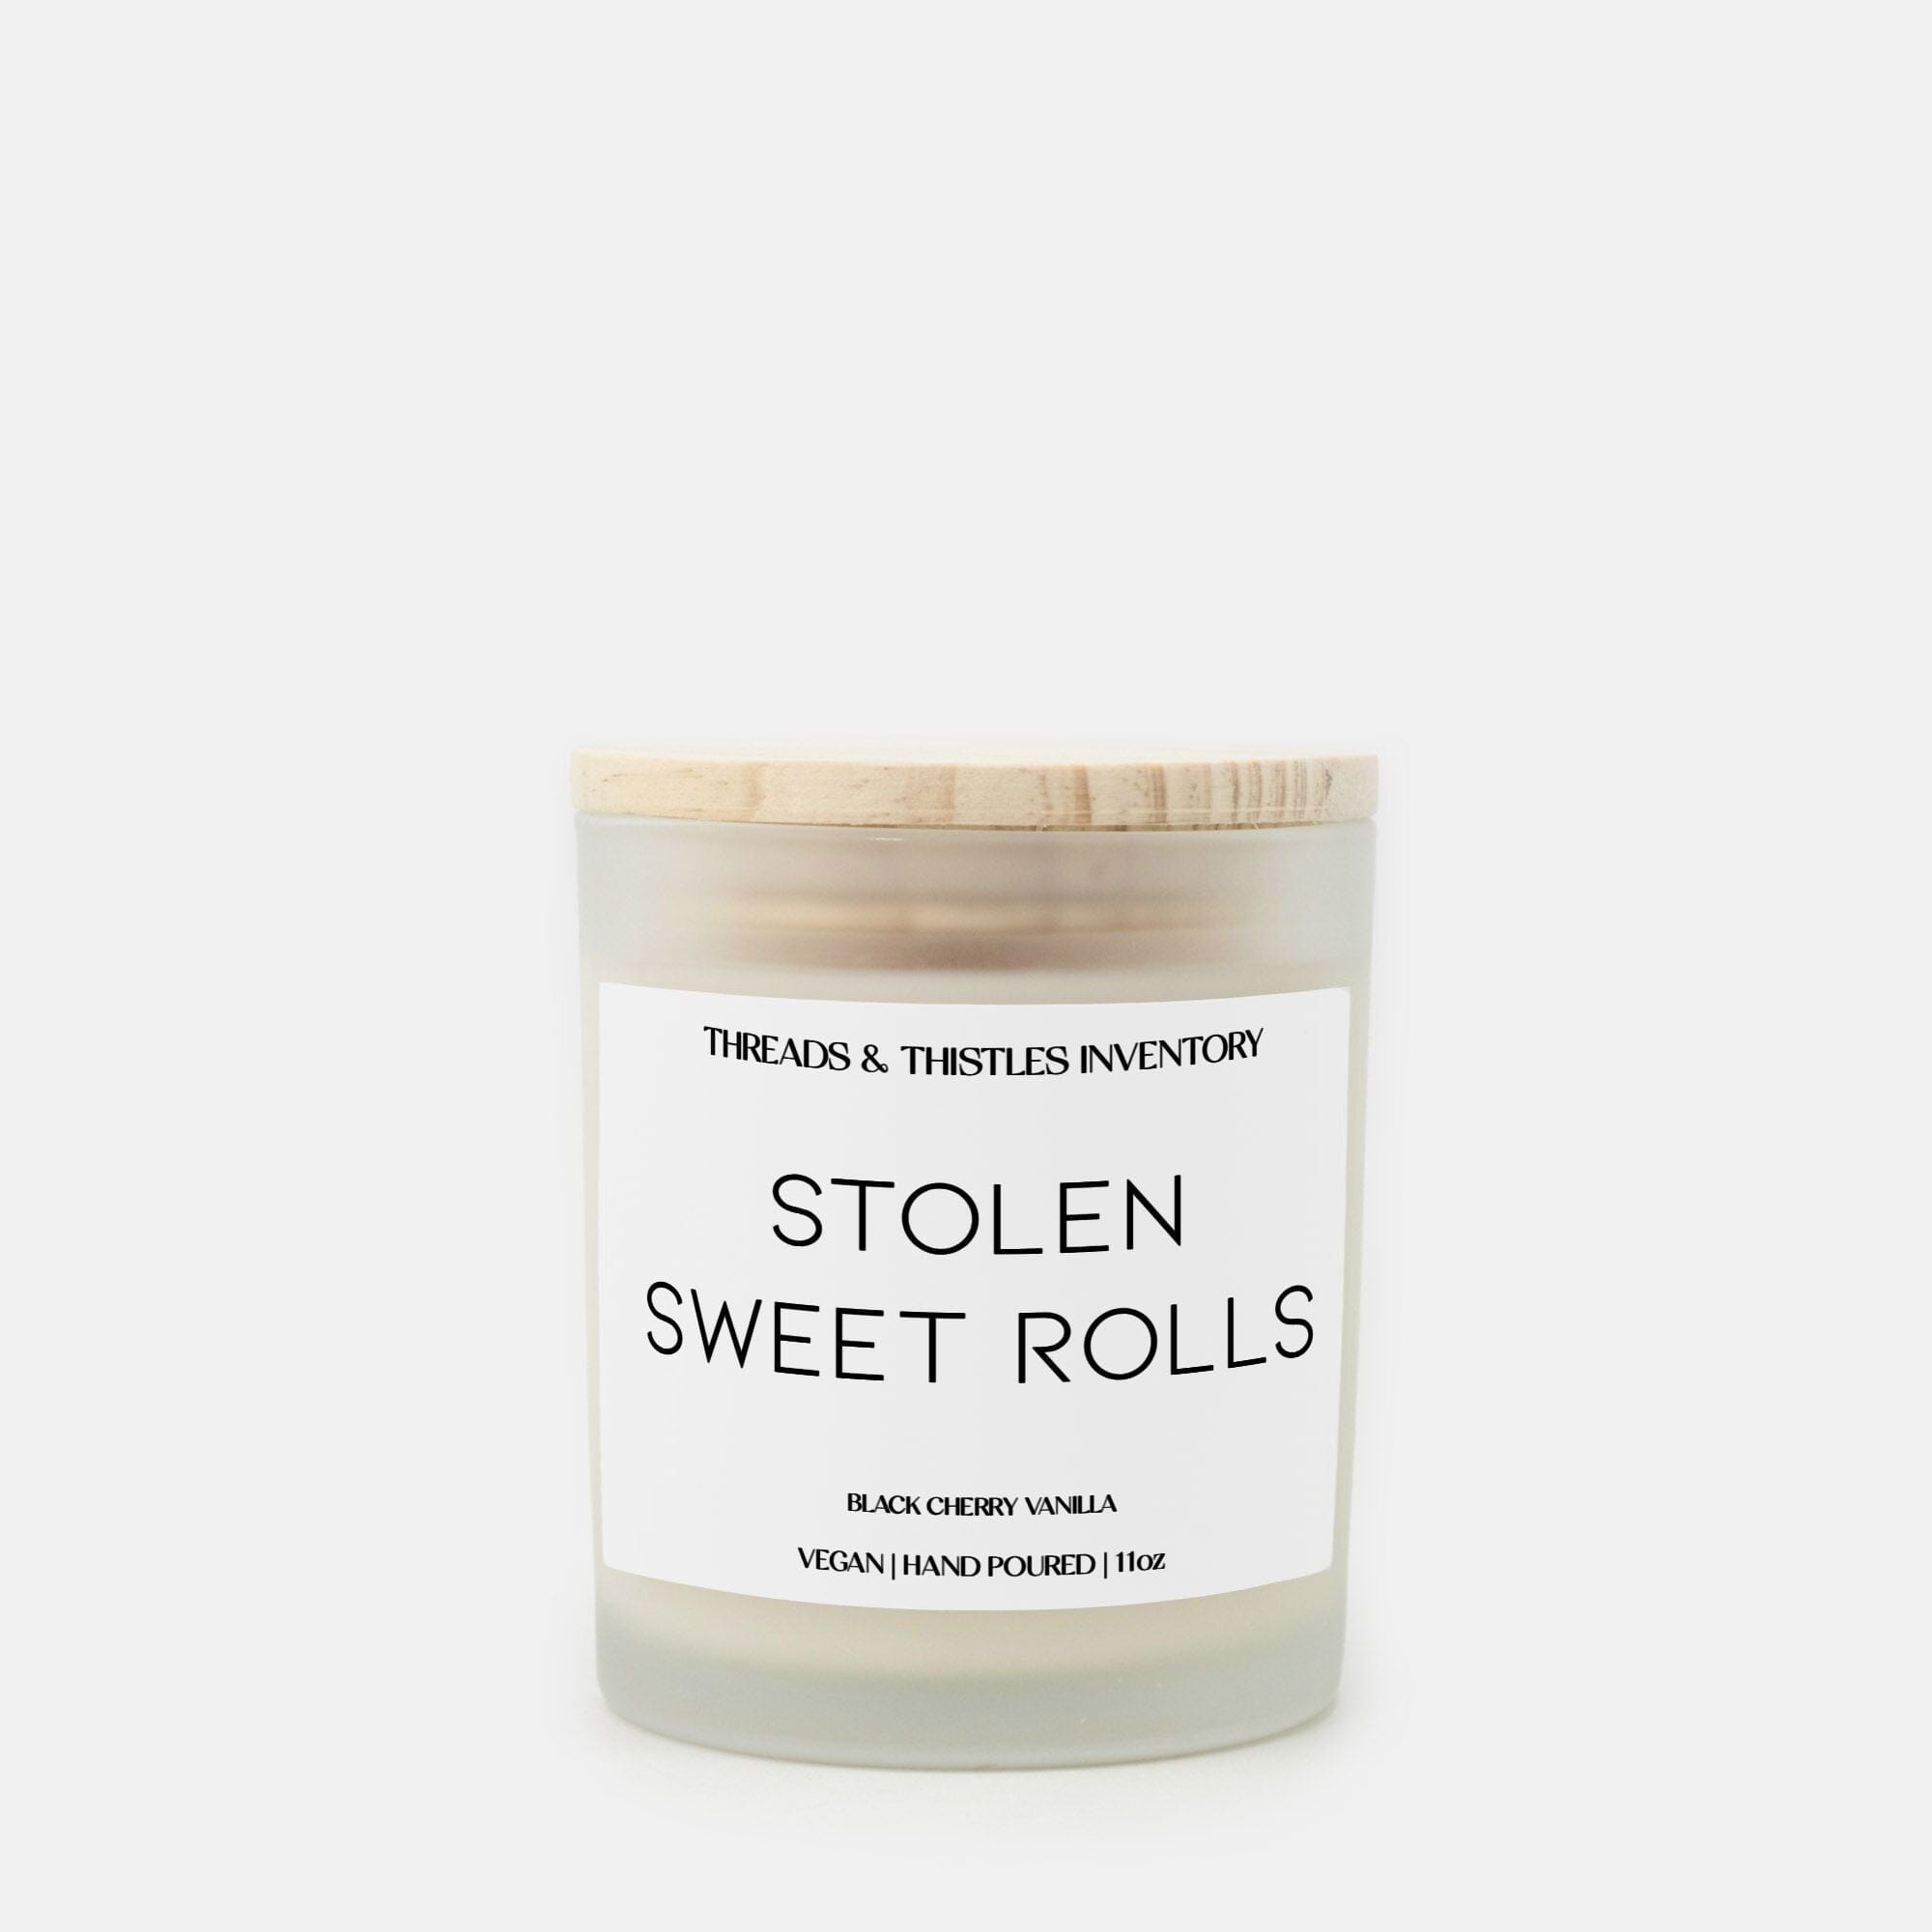 Stolen Sweet Rolls | 11oz Candle | Skyrim Candles Threads & Thistles Inventory 